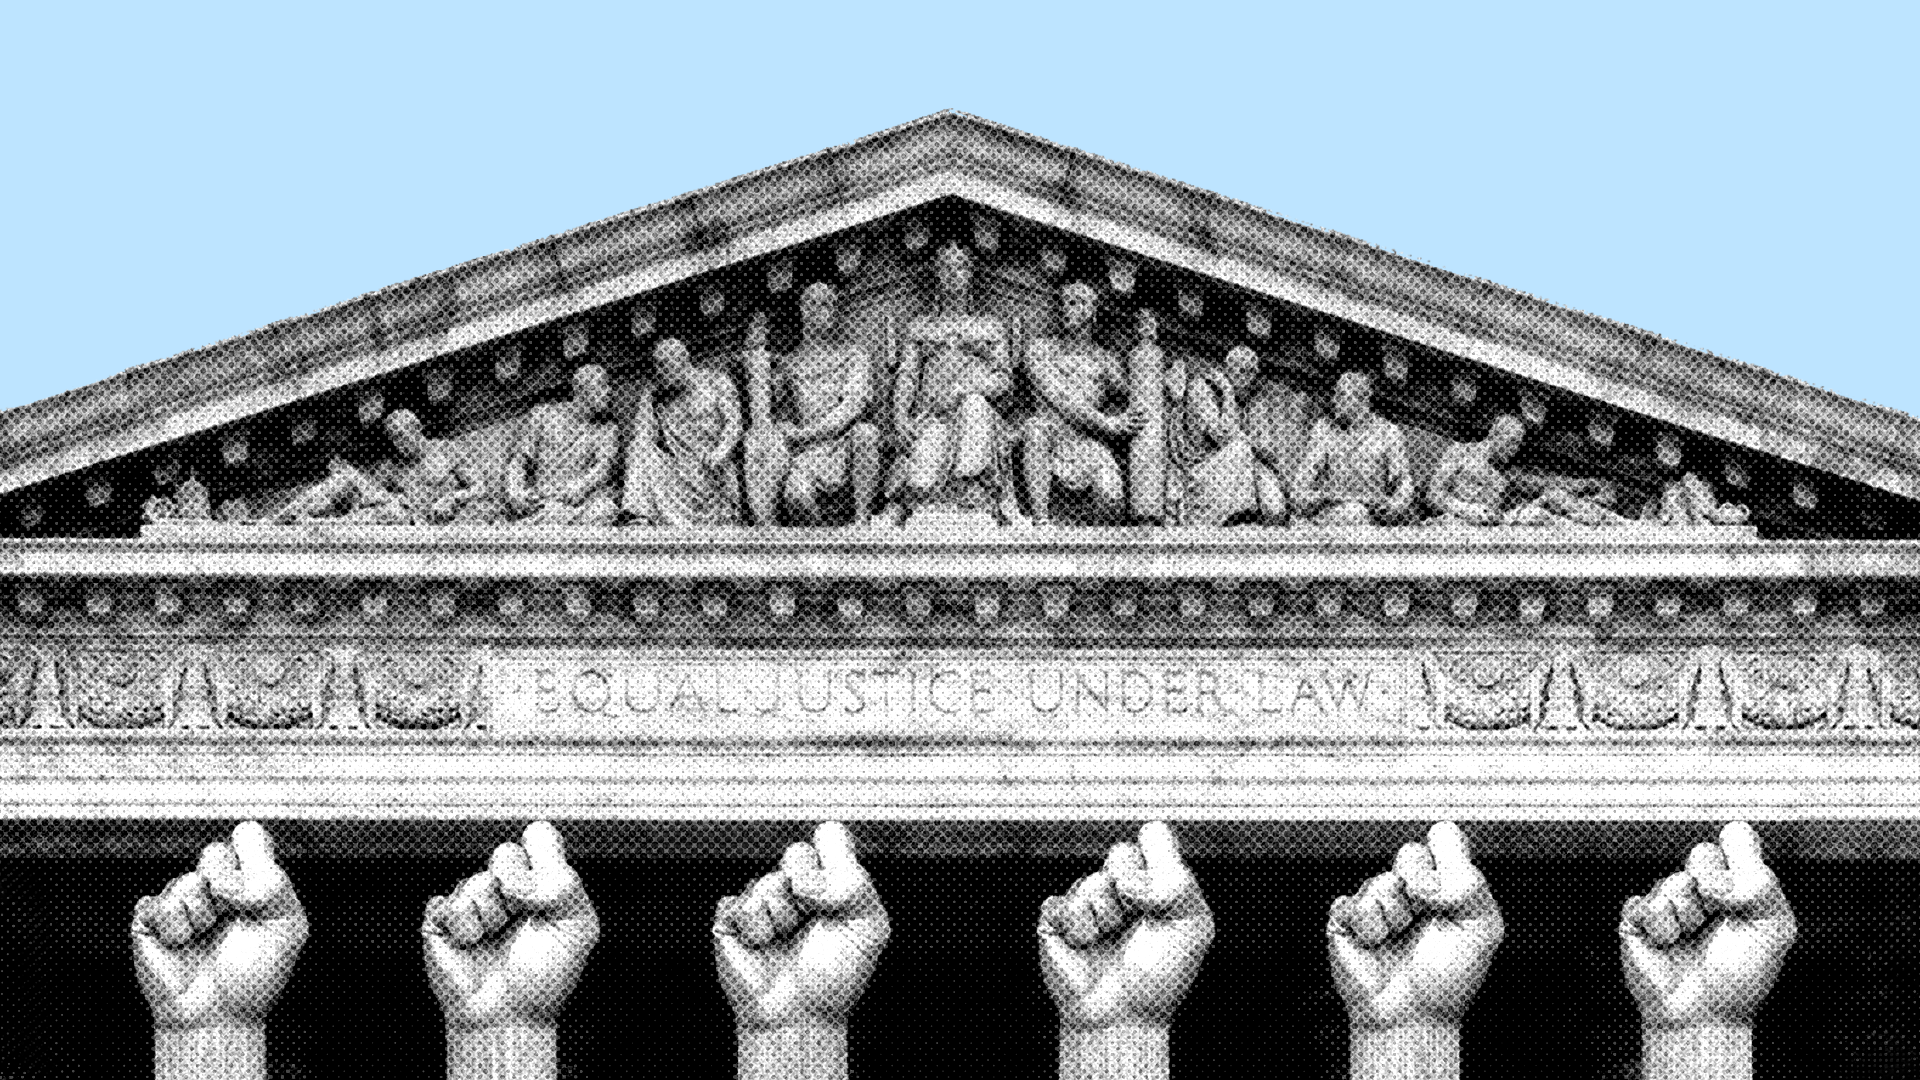 Supreme Court building with columns made out of raised fists